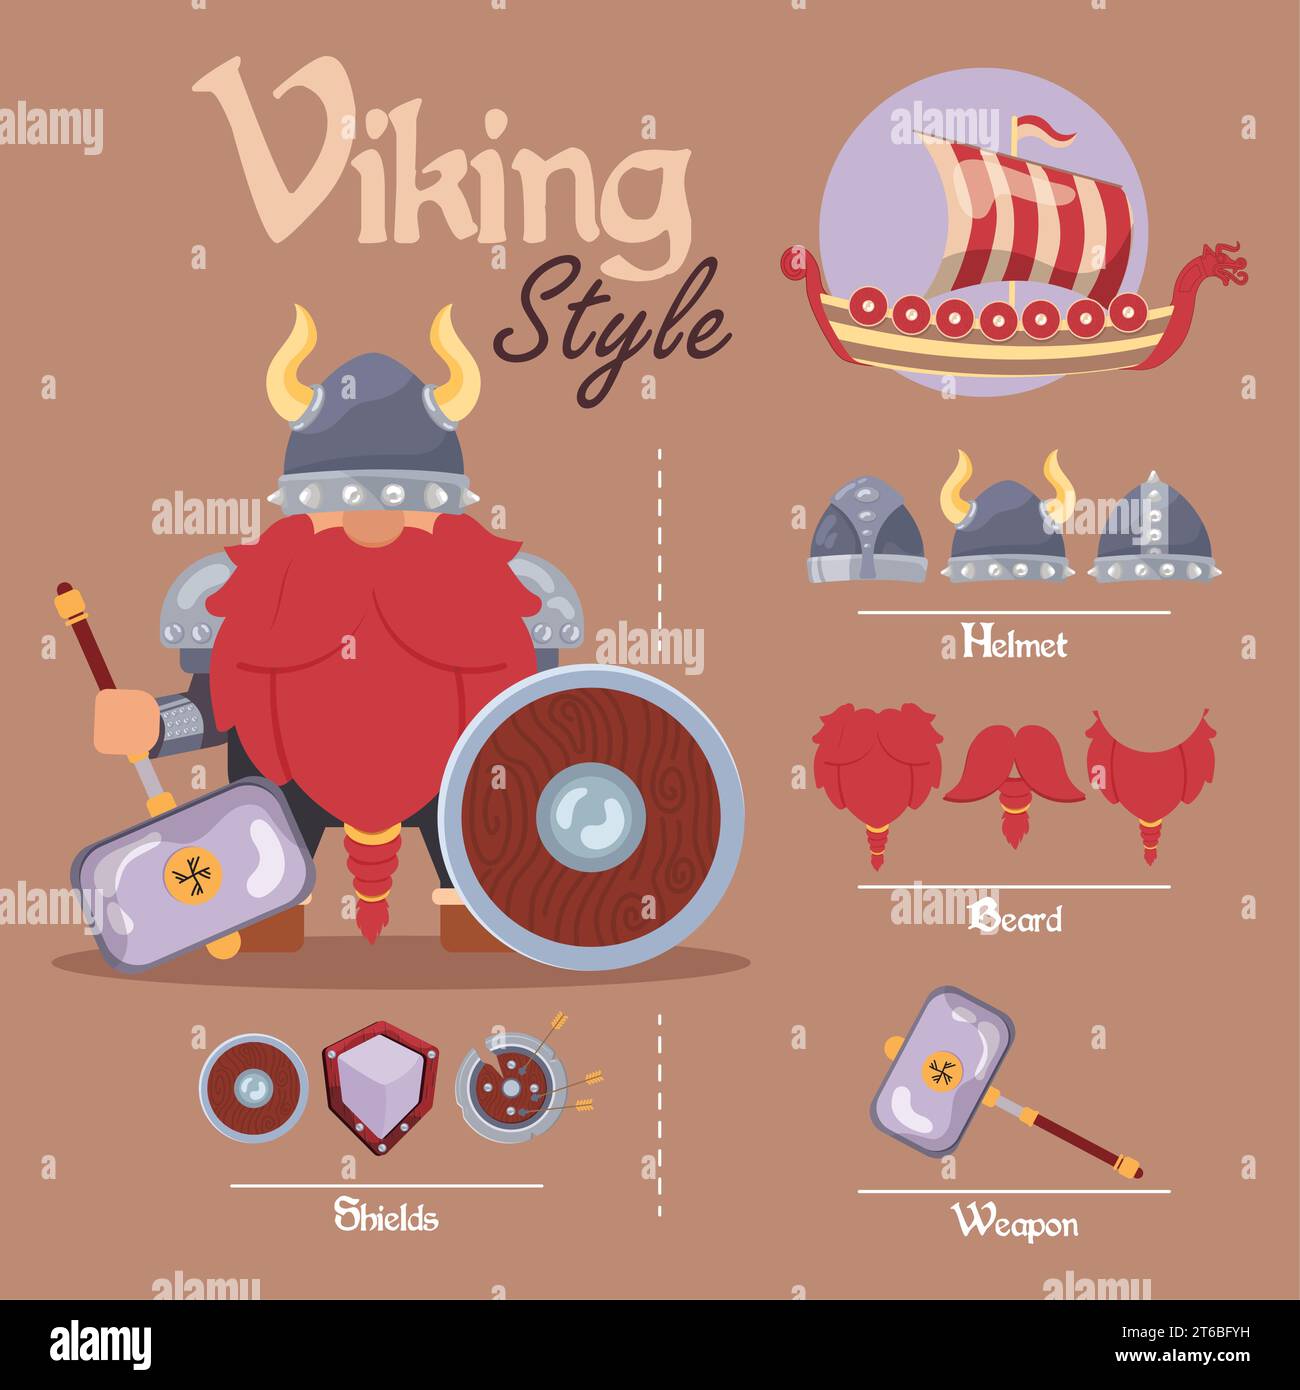 Cute viking male character asset with weapons and helmets Vector Stock Vector